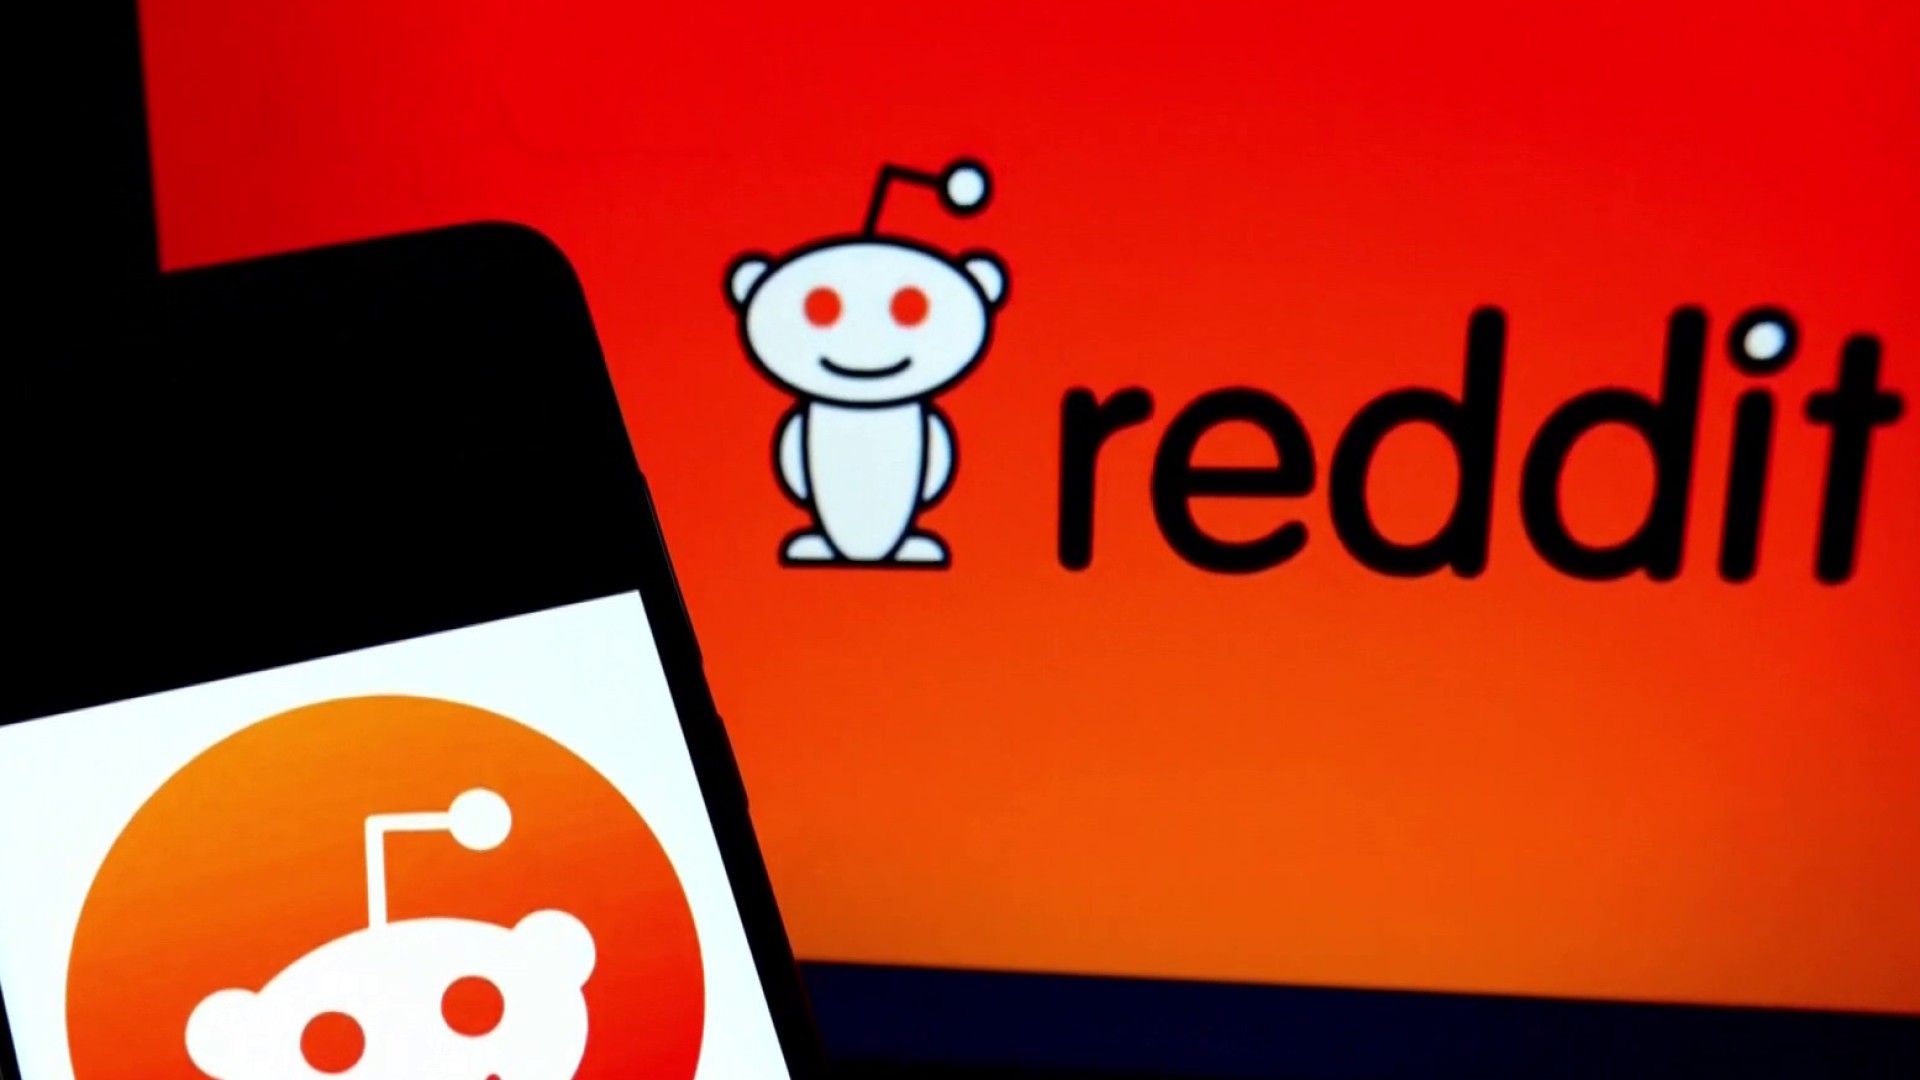 Reddit CEO slams protesters, says hell change moderator rules